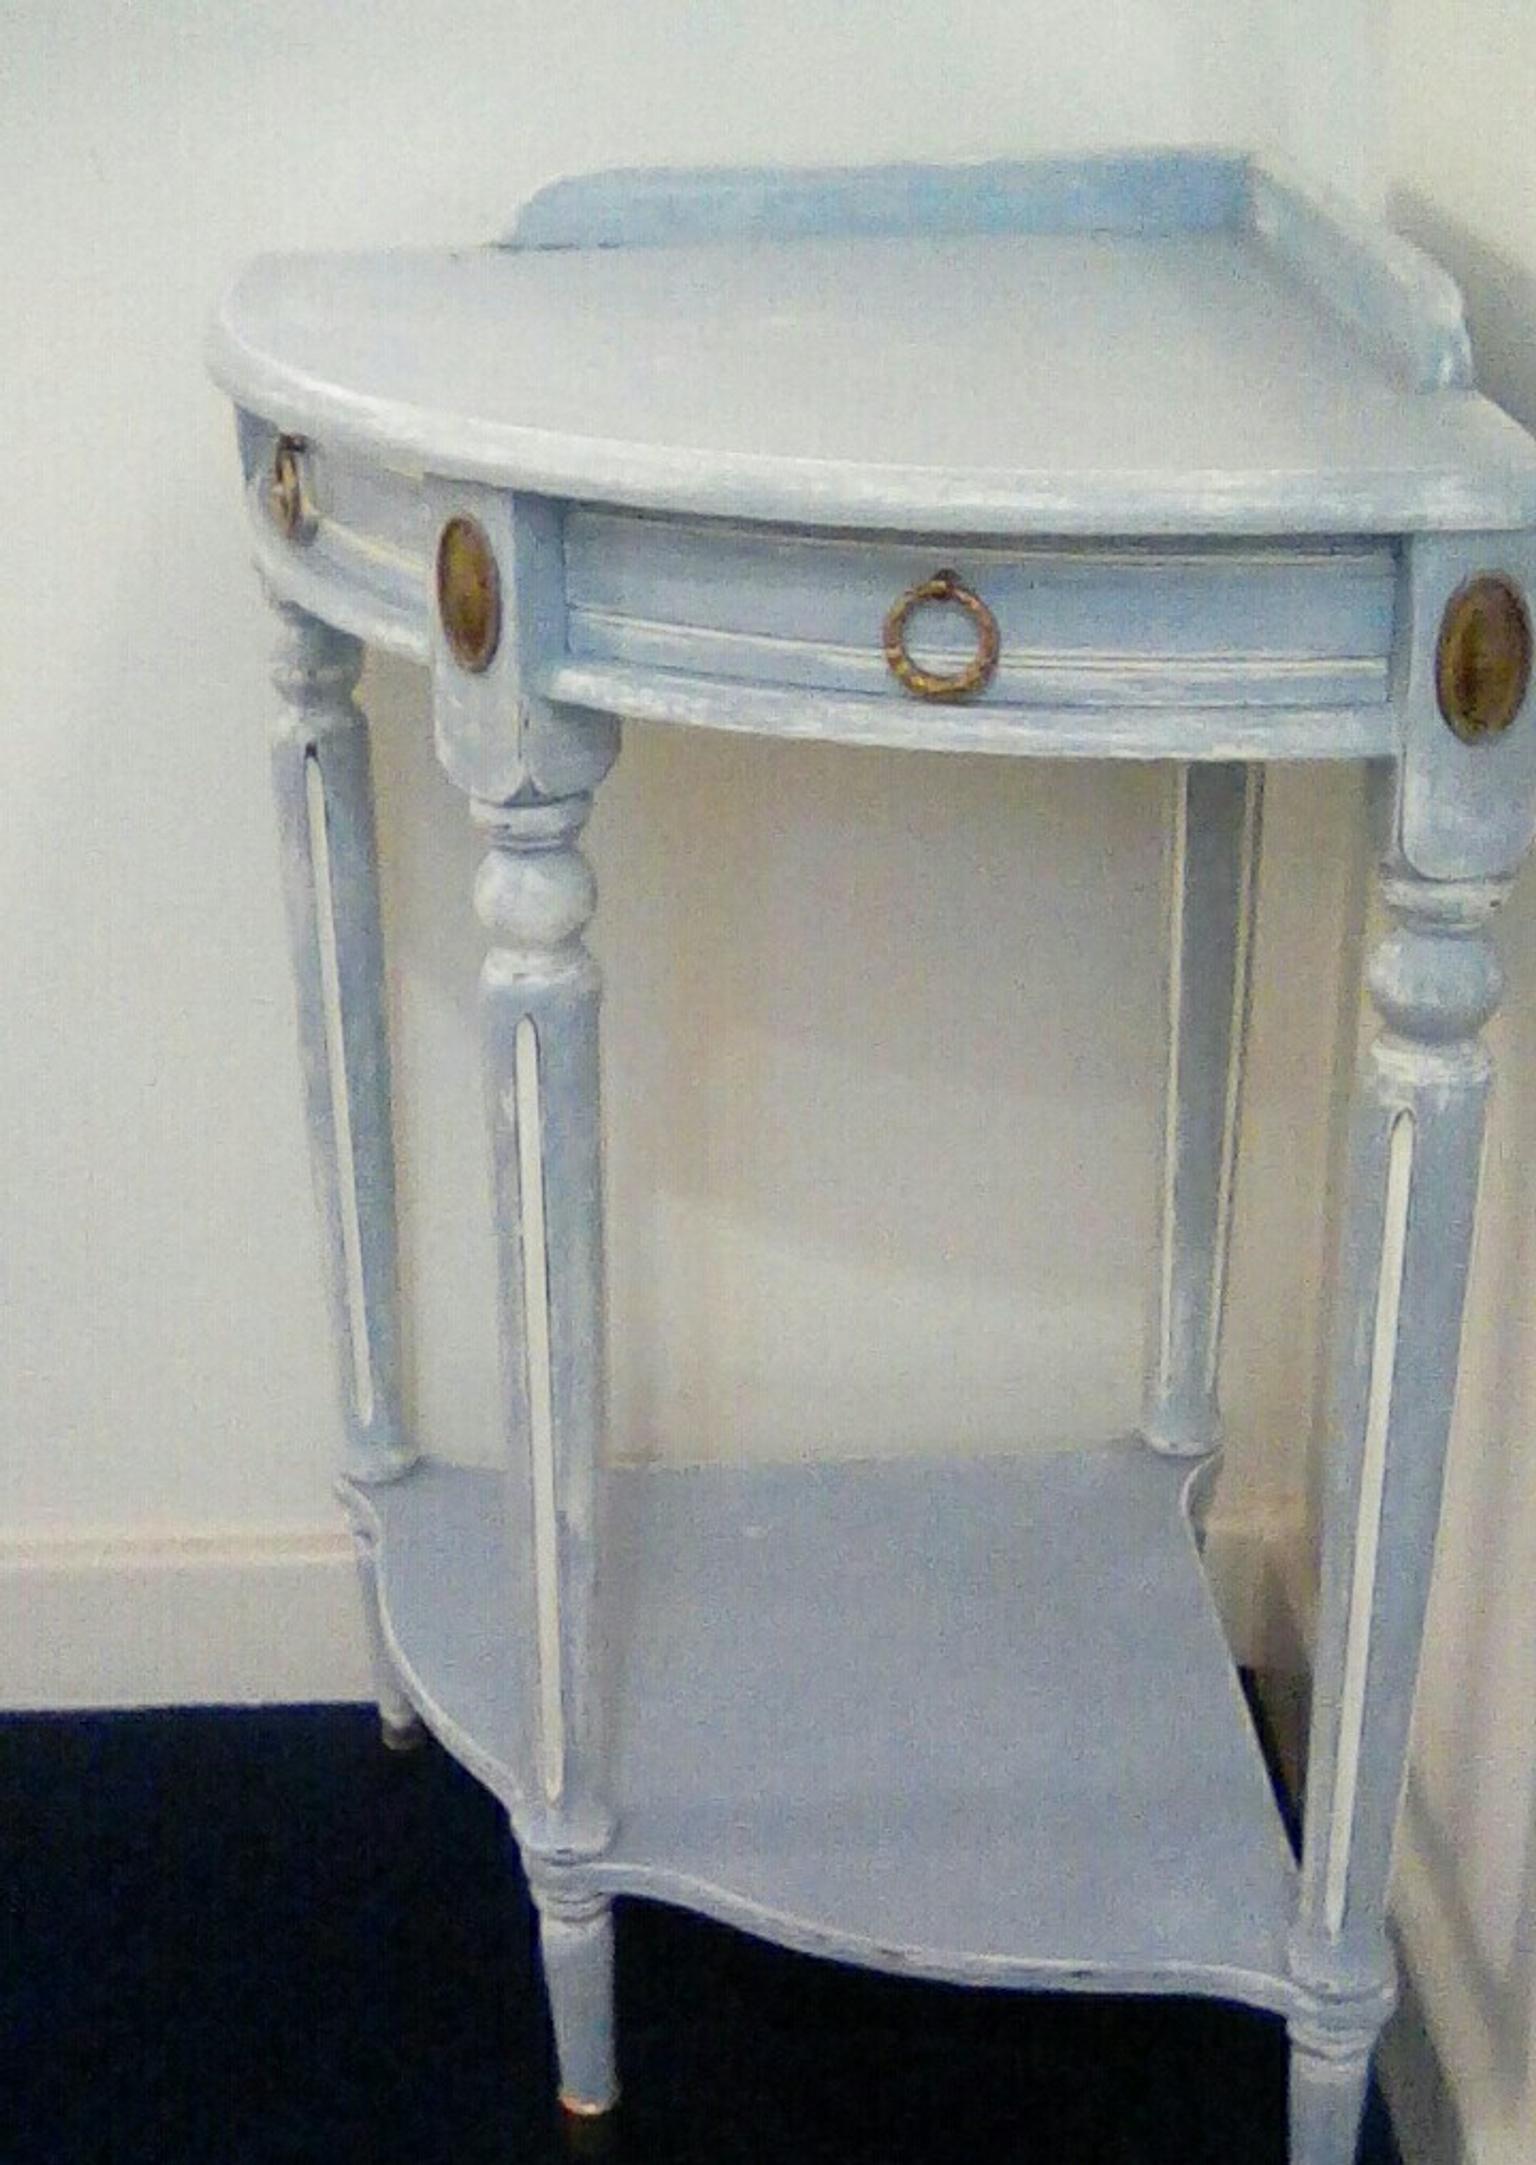 Shabby Chic Corner Table In B76 Birmingham For 12 50 For Sale